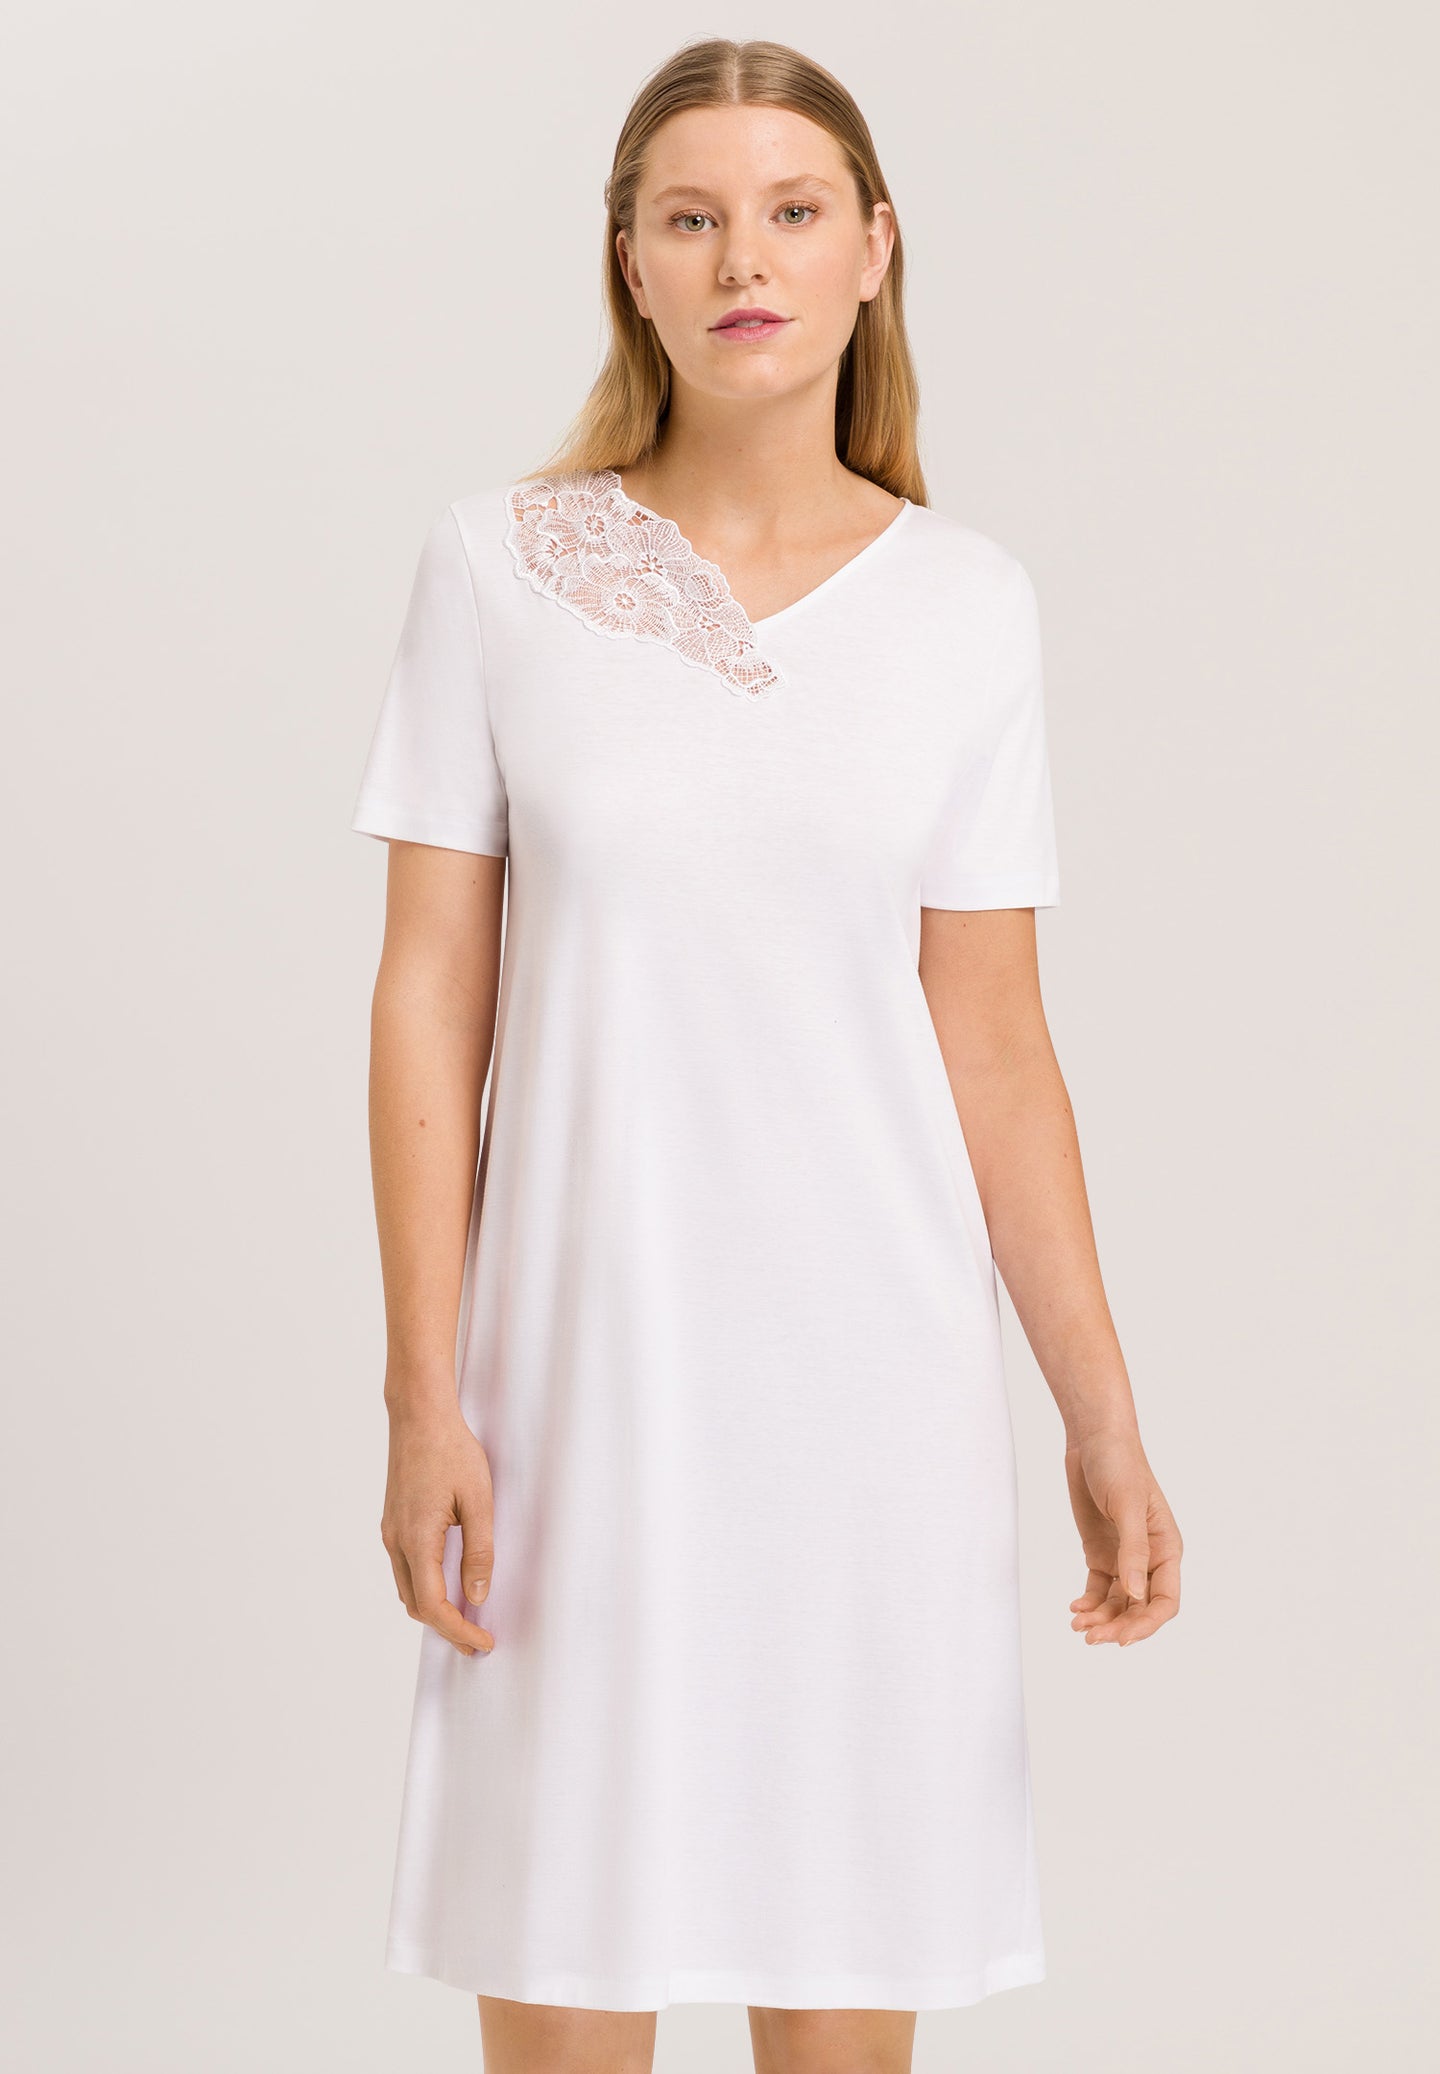 Made from 100% soft mercerised knitted cotton. Delighful asymmetric appliqué lace detail at the neckline. This is a lovely short sleeve nightgown. Deliciously comfortable for sleeping and lounging.  Length: 100cm  Composition: 100% Pure Cotton 100% Polyester Lace  Made in Europe Machine washable. Pure White.